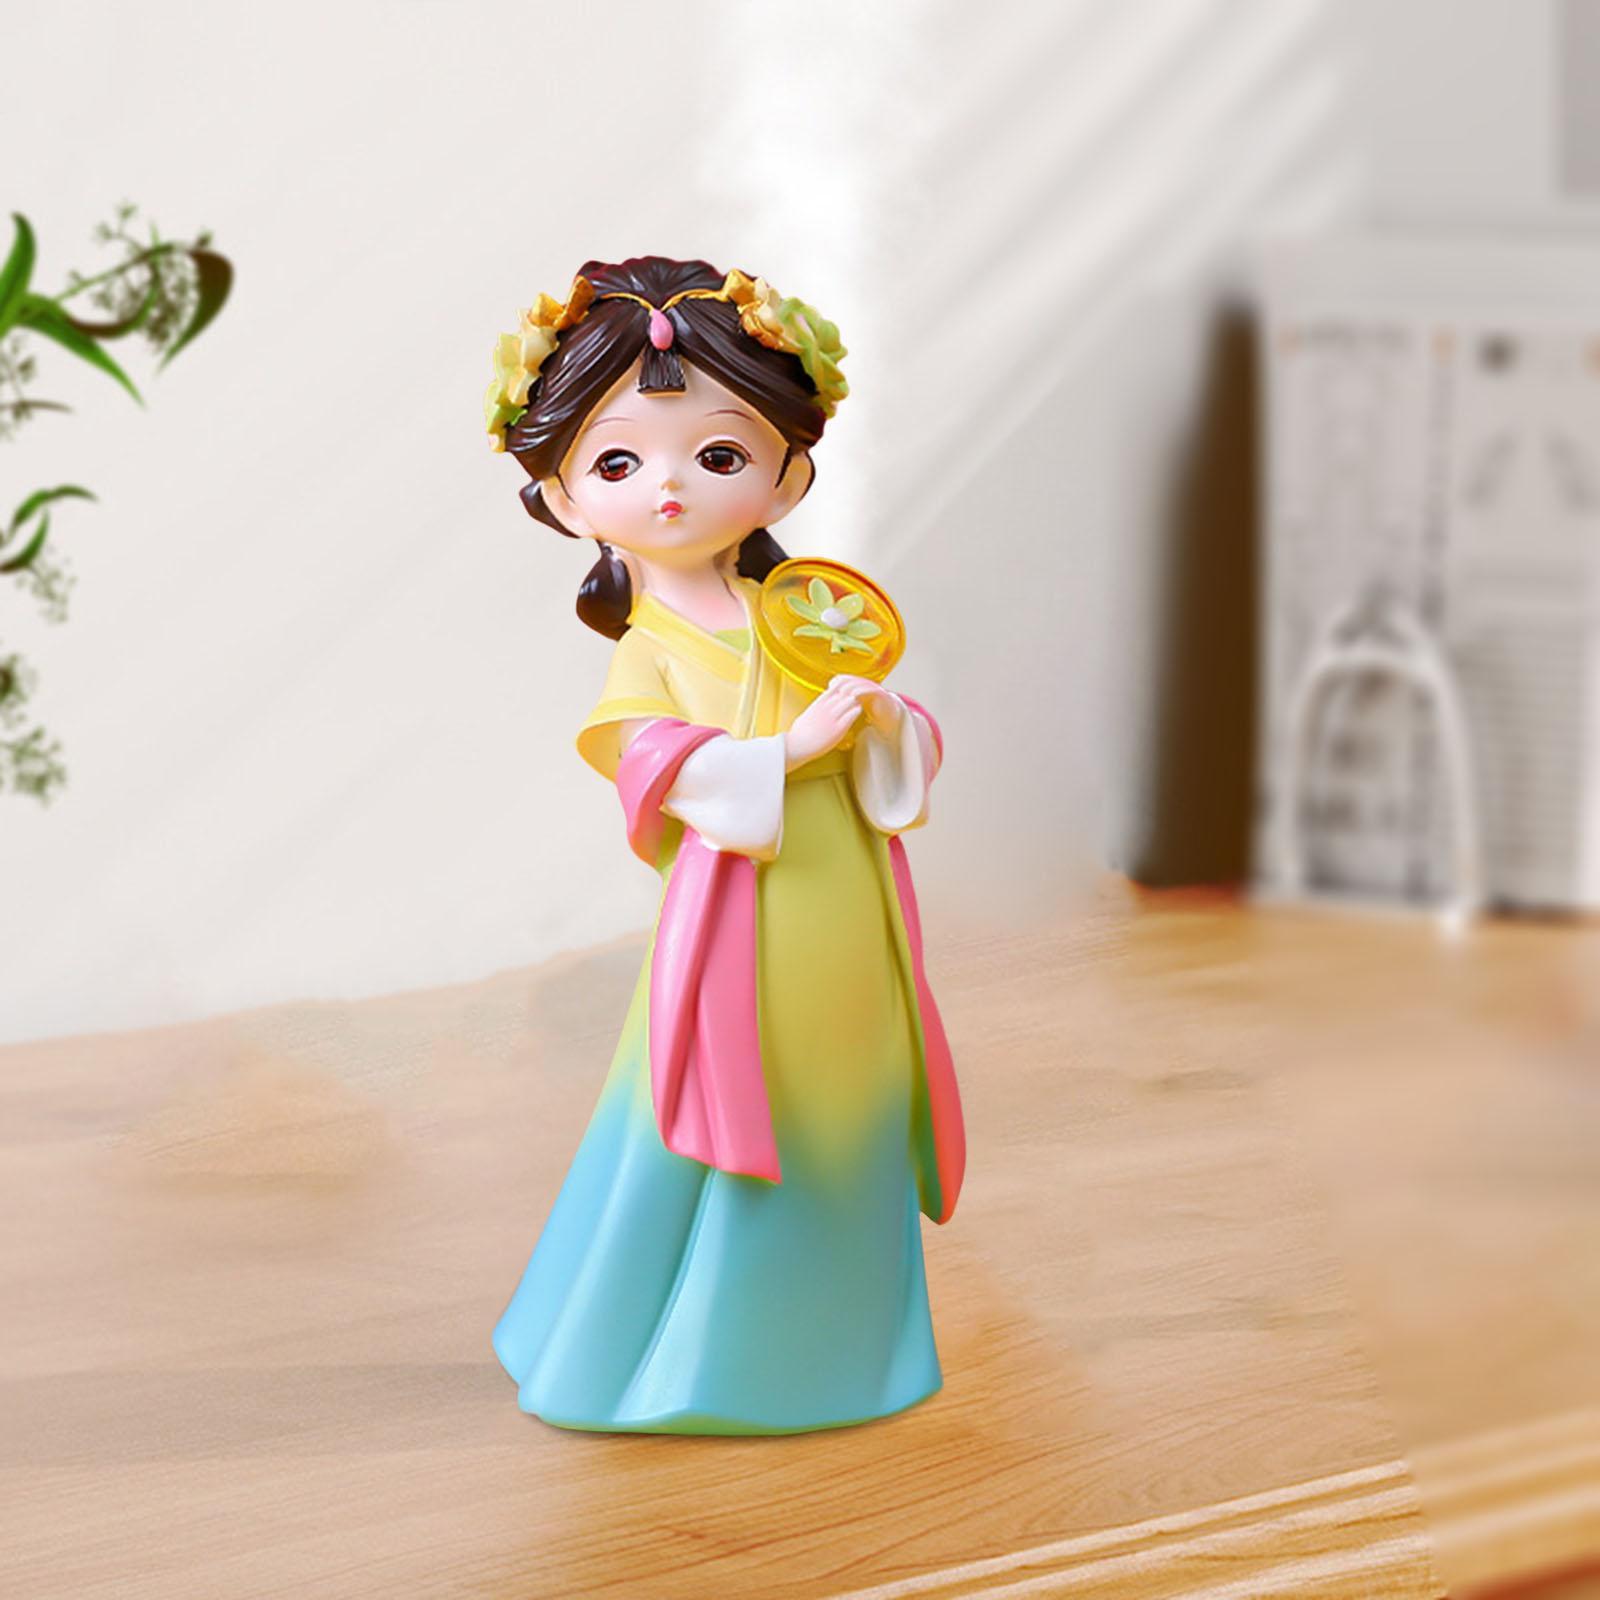 Traditional Chinese Girls Statue Sculpture Table Centerpiece Collectible Home Resin Figurines for Cabinet Entryway Living Room Party Wedding